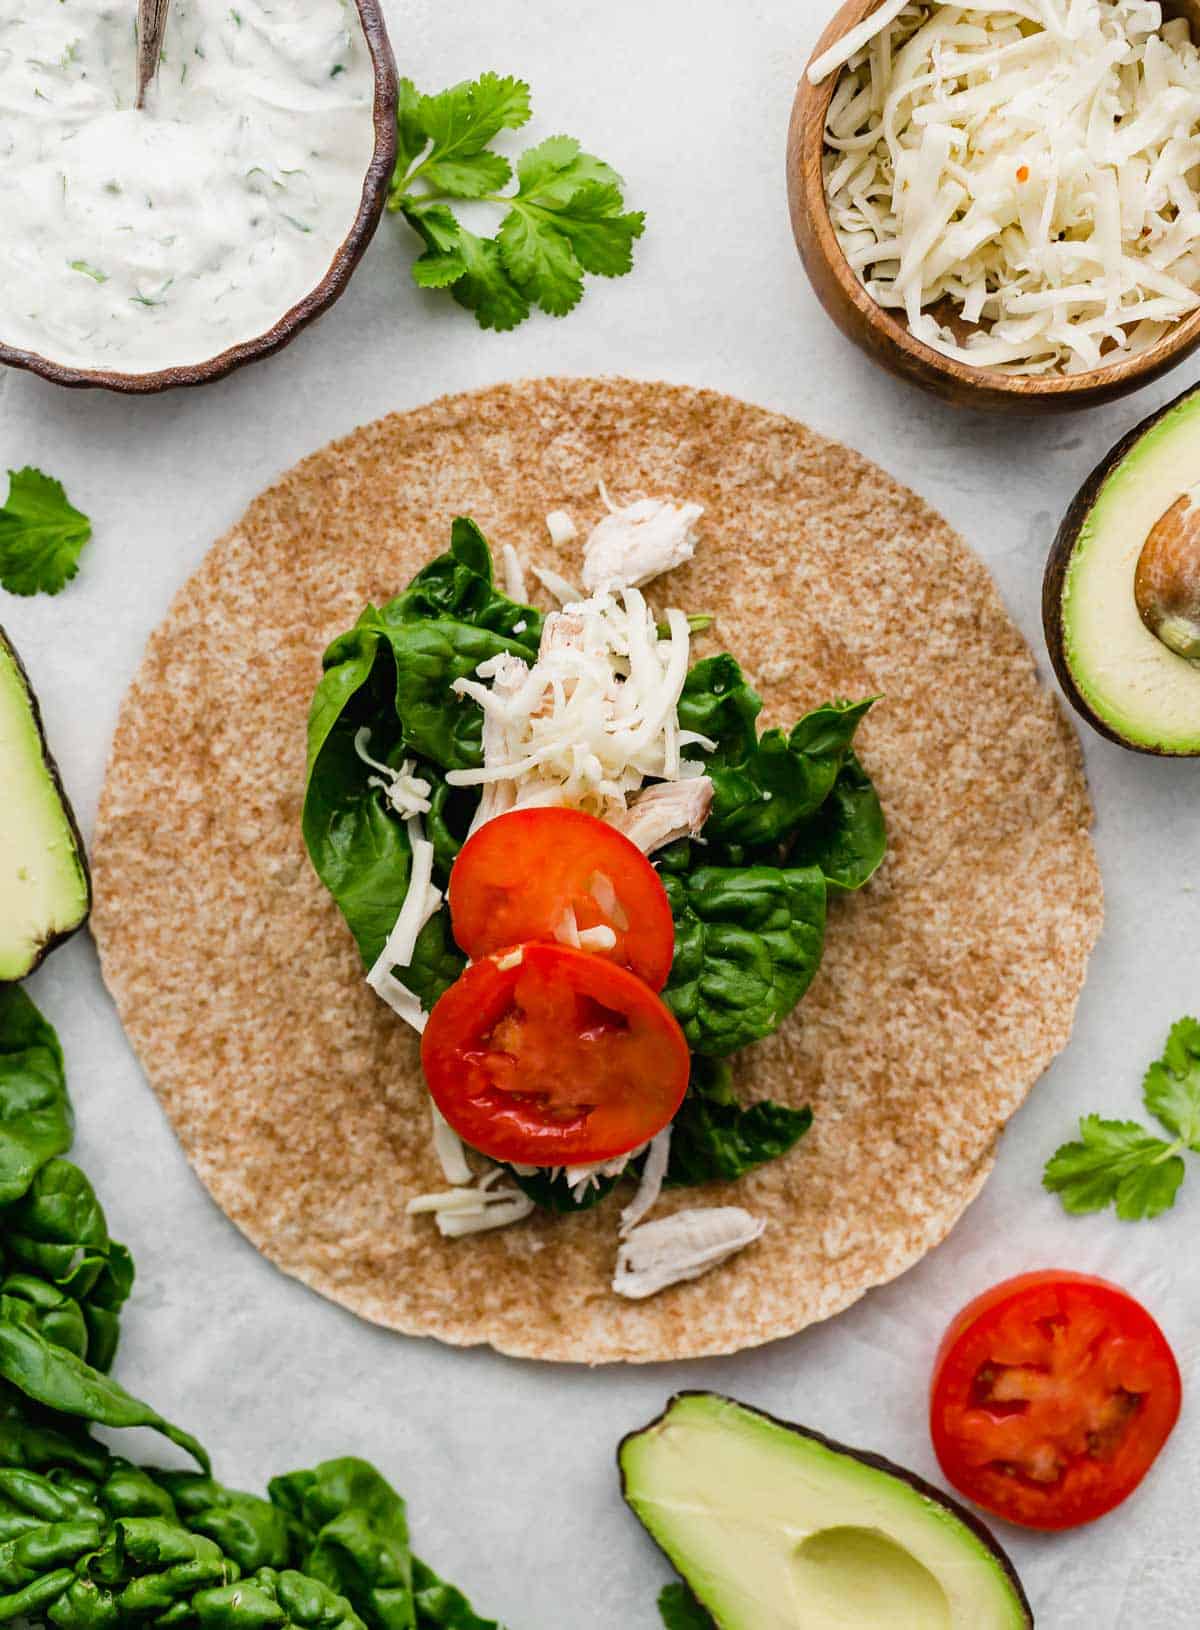 A whole wheat tortilla topped with rotisserie chicken, spinach, and sliced tomatoes.